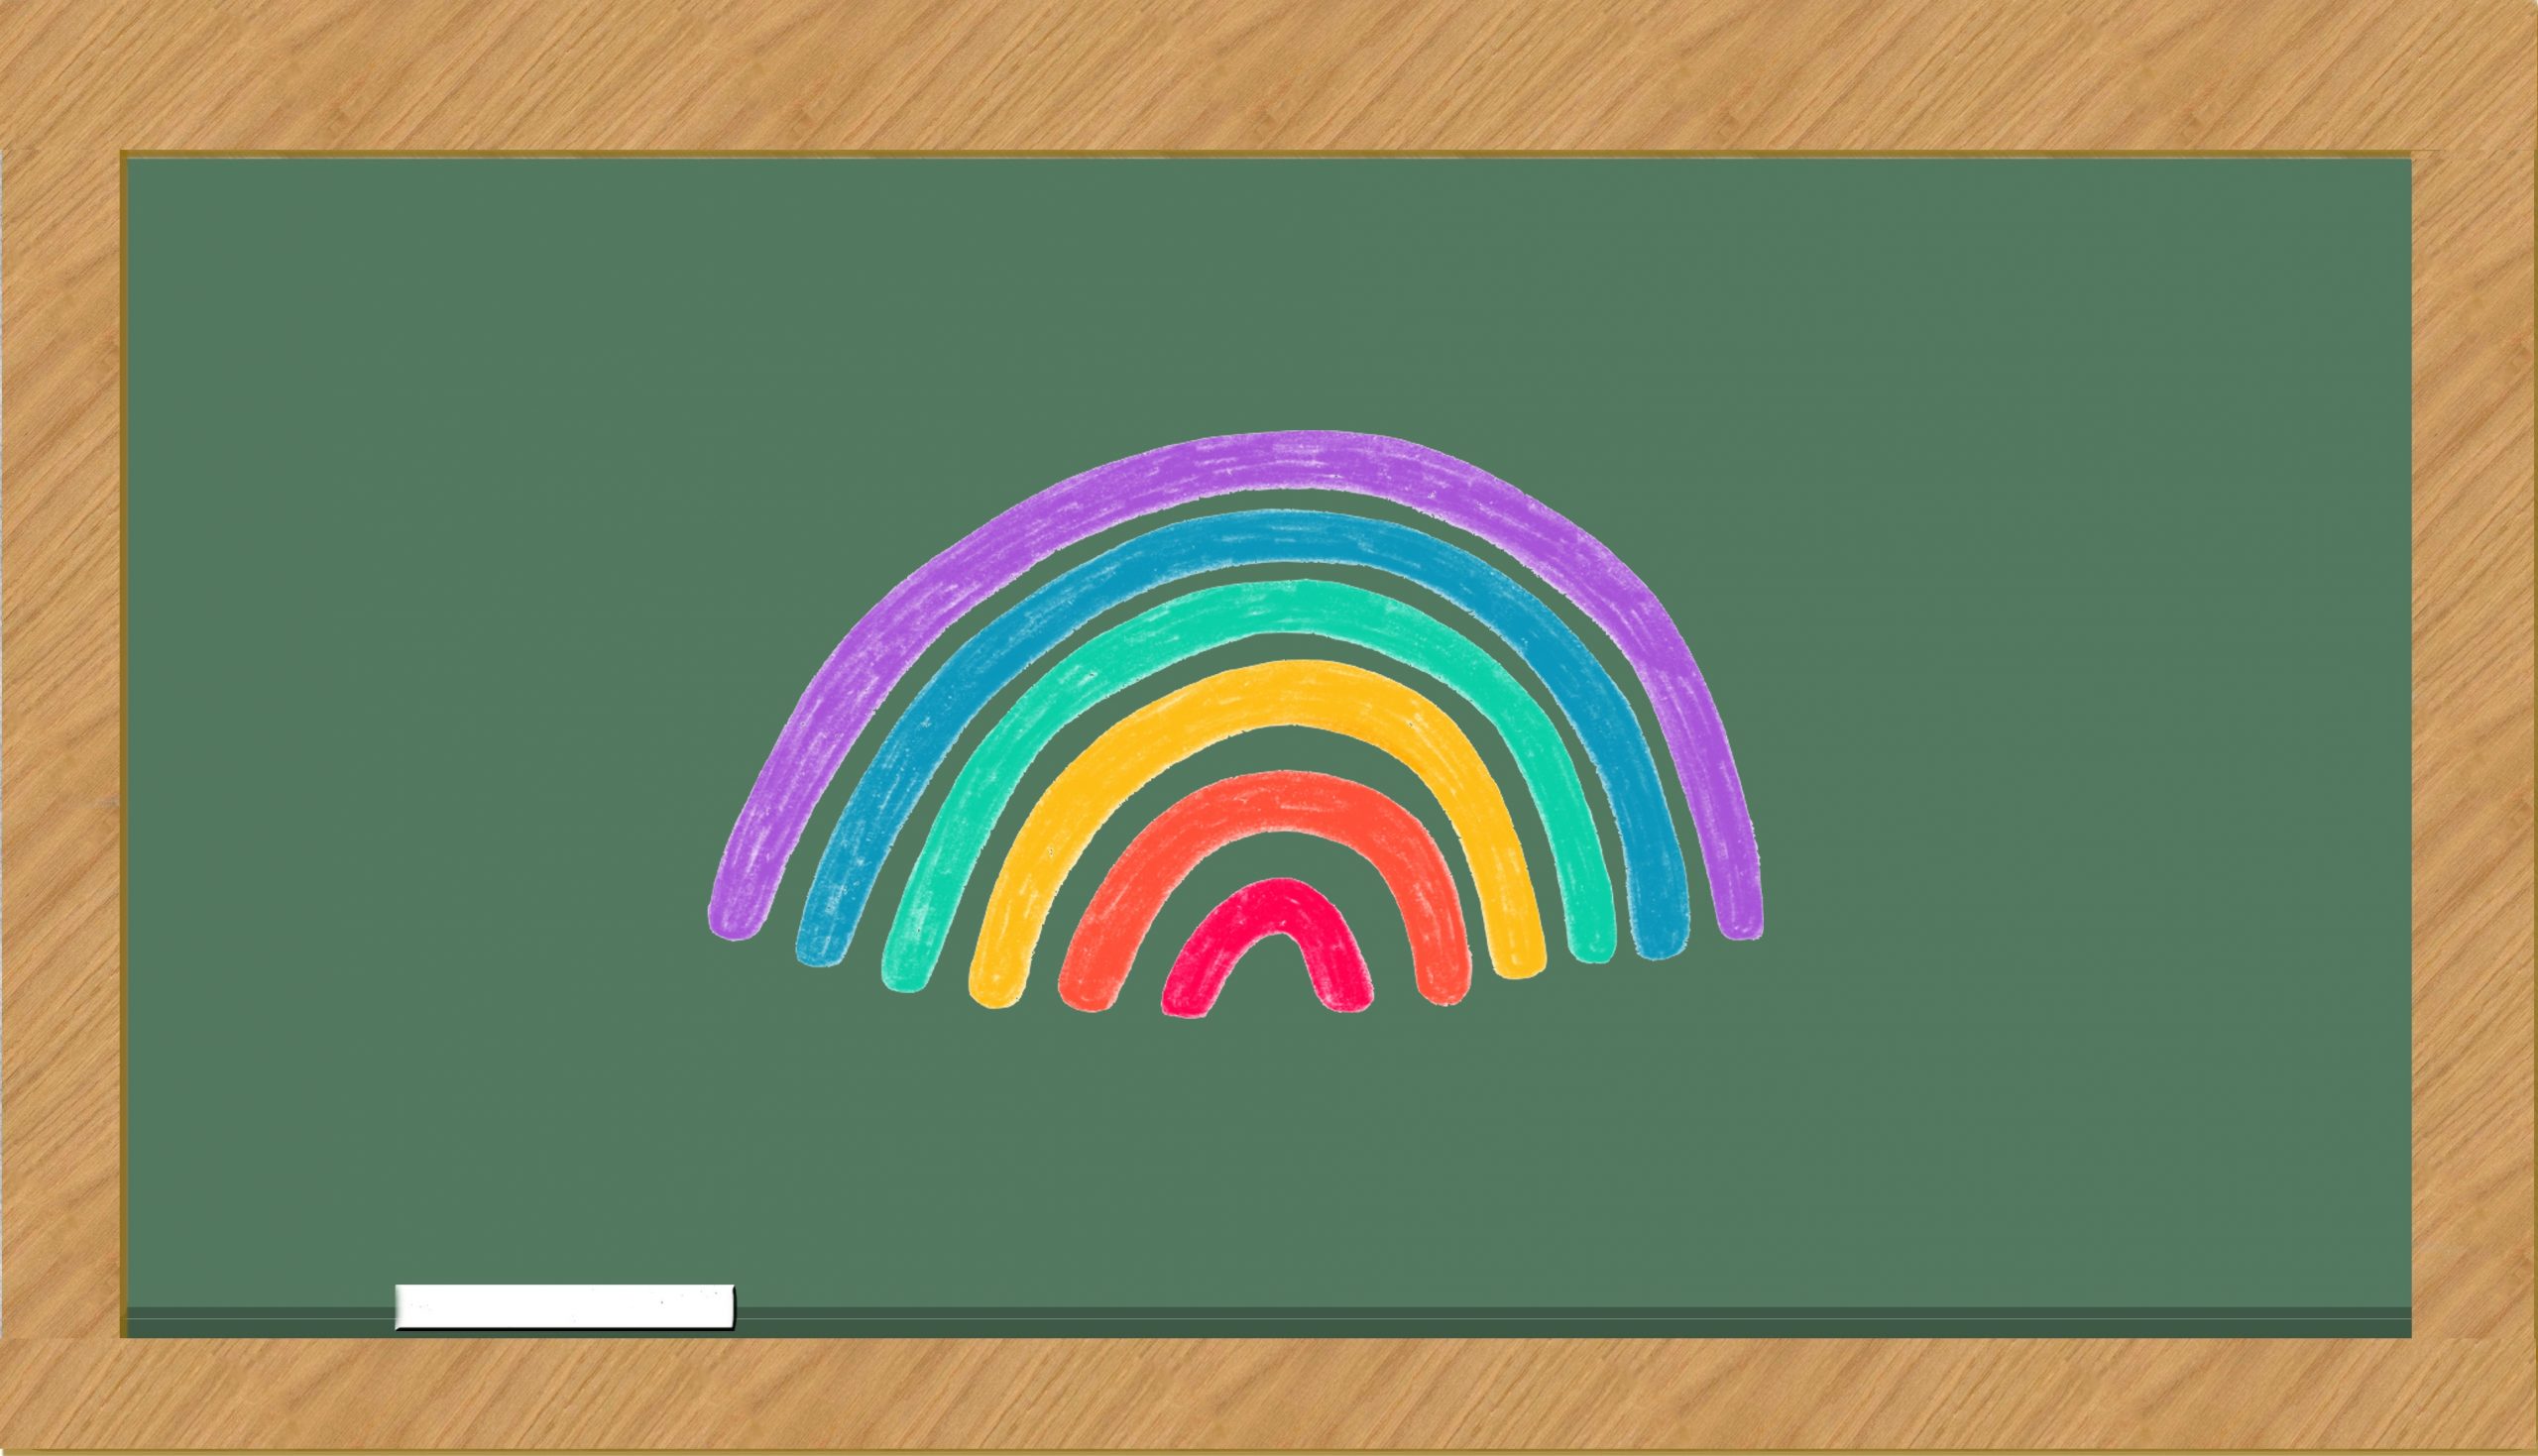 A digital illustration of a green chalkboard with a wooden frame. A white piece of chalk sits on the left side. In the center of the chalkboard is a drawn rainbow.